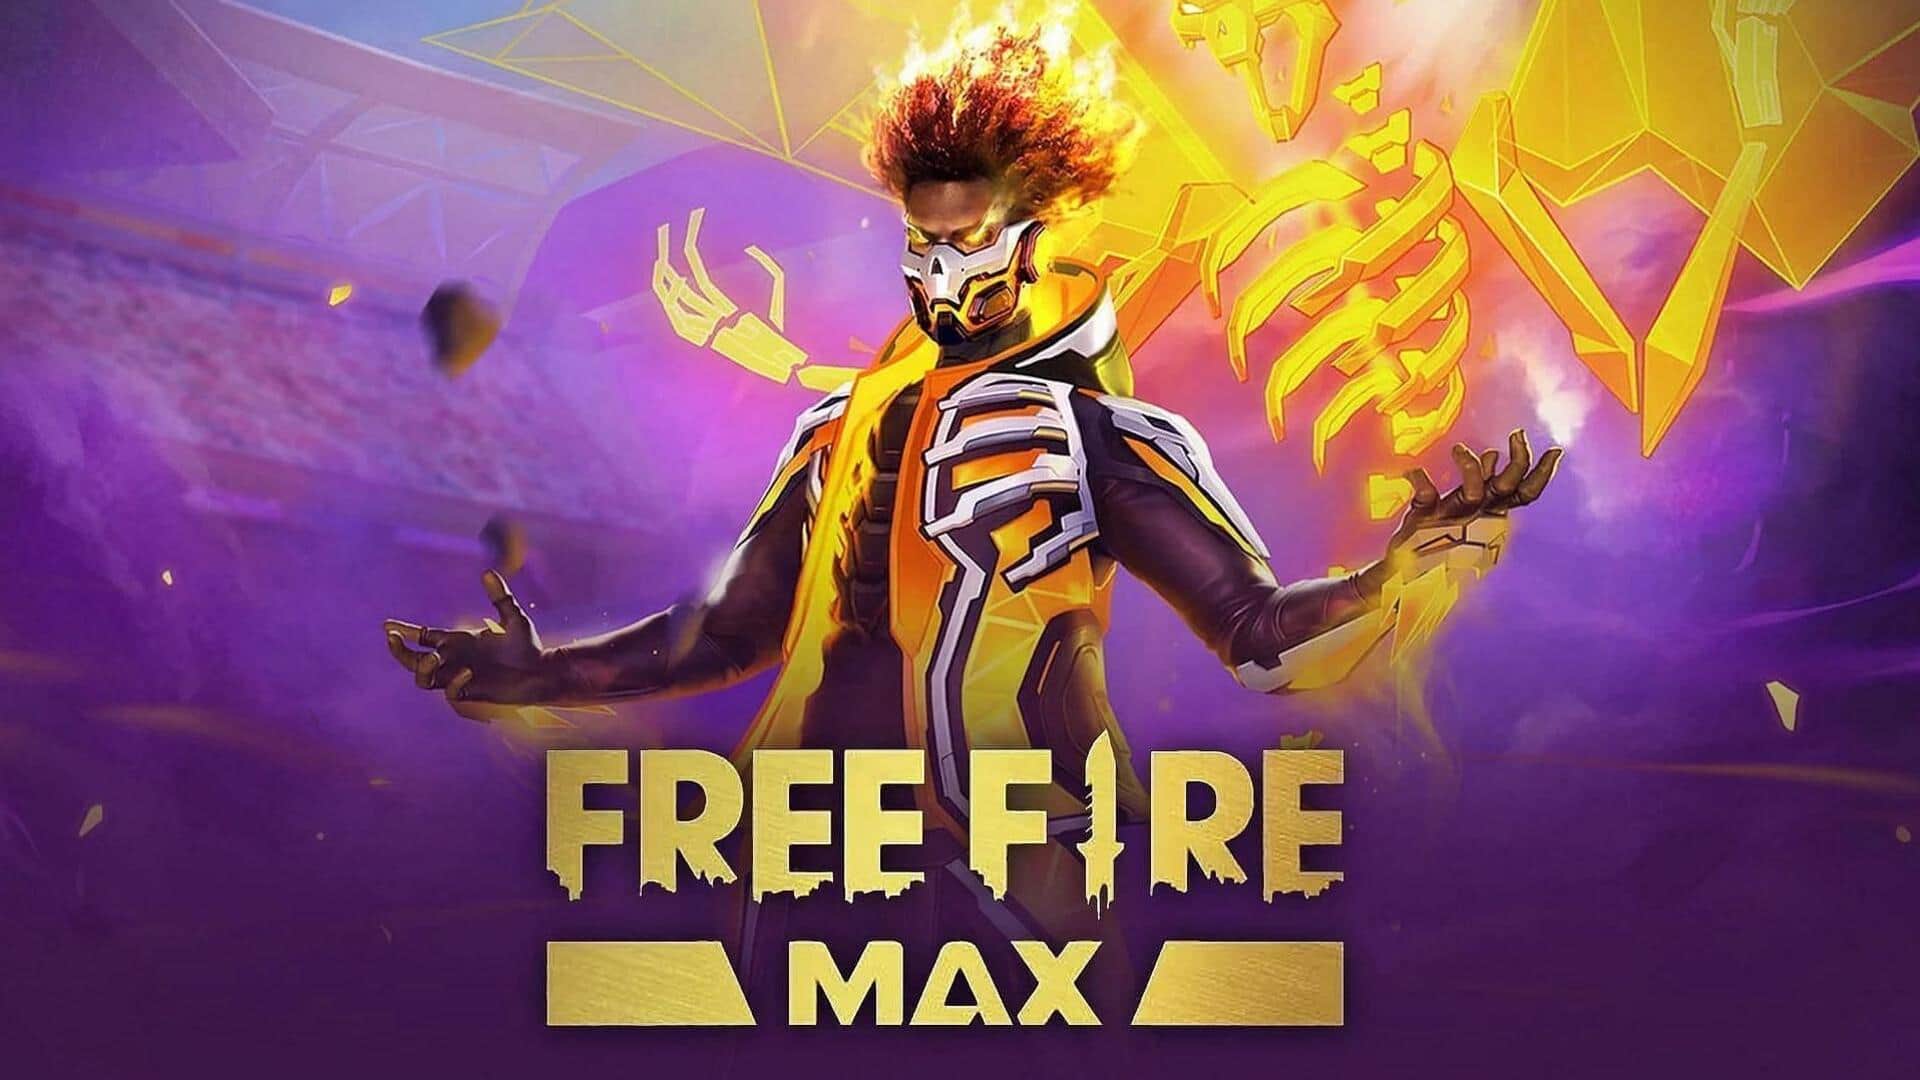 Garena Free Fire MAX's August 19 codes: How to redeem